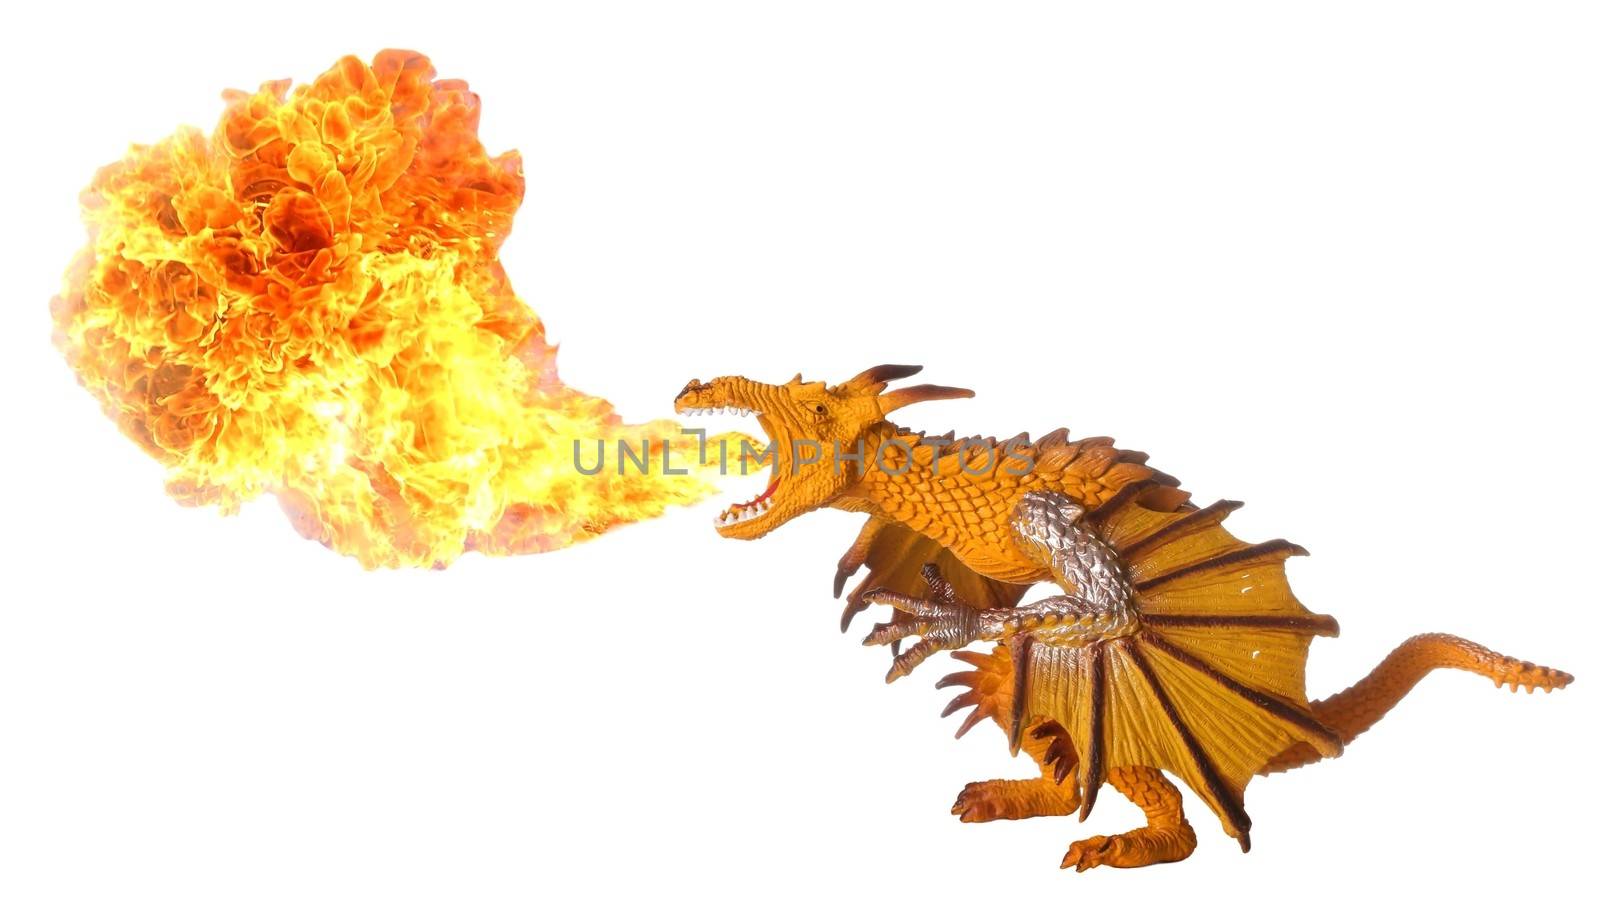 Toy dragon breathing out huge hot flame